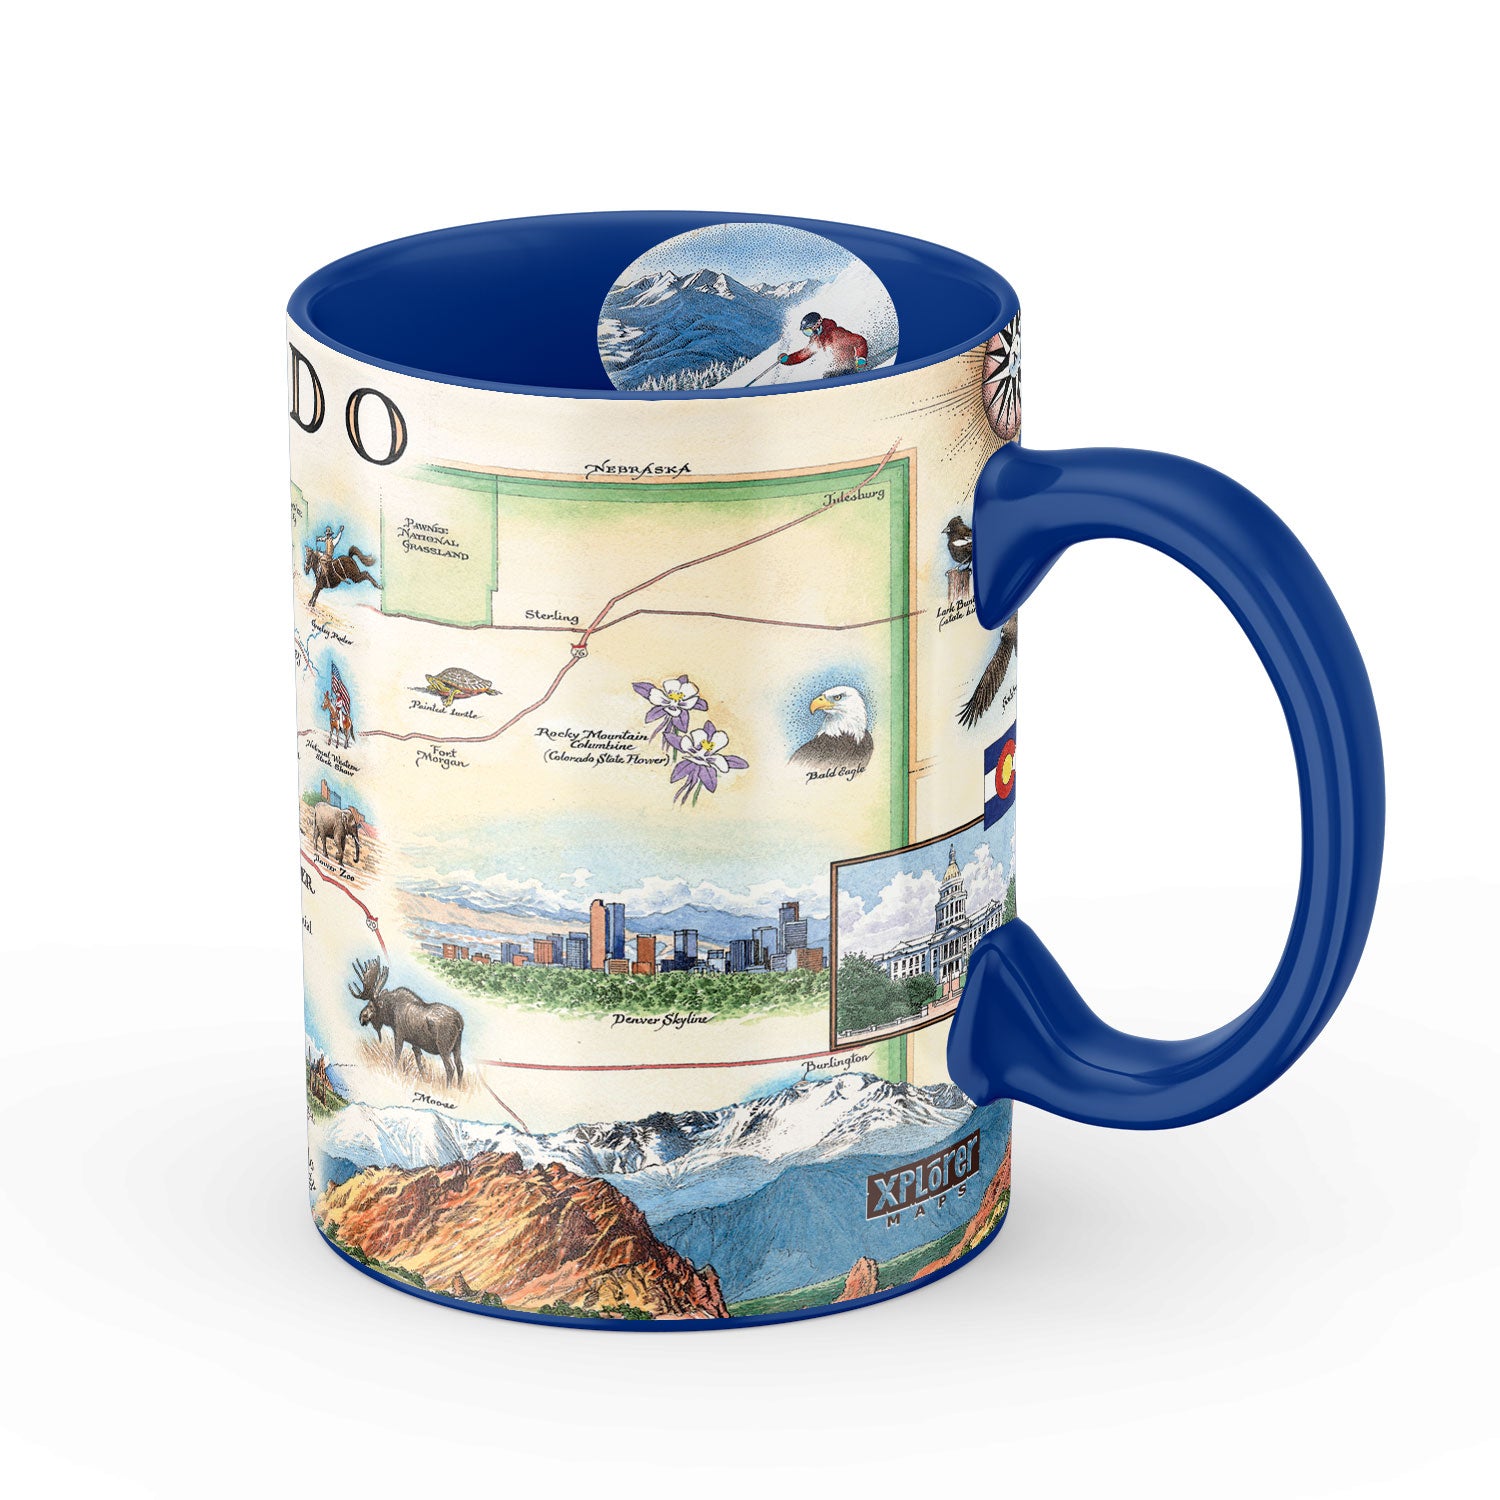 Blue Colorado state map ceramic mug by Xplorer Maps showcases various cities including Denver, Fort Collins, Colorado Springs, Aspen, and Durango. It also features local flora and fauna, such as moose, Rocky Mountain elk, turtles, eagles, and Bighorn Sheep, as well as the indigenous Navajo and Hopi peoples. The map highlights popular activities like hiking, biking, rafting, and skiing.  